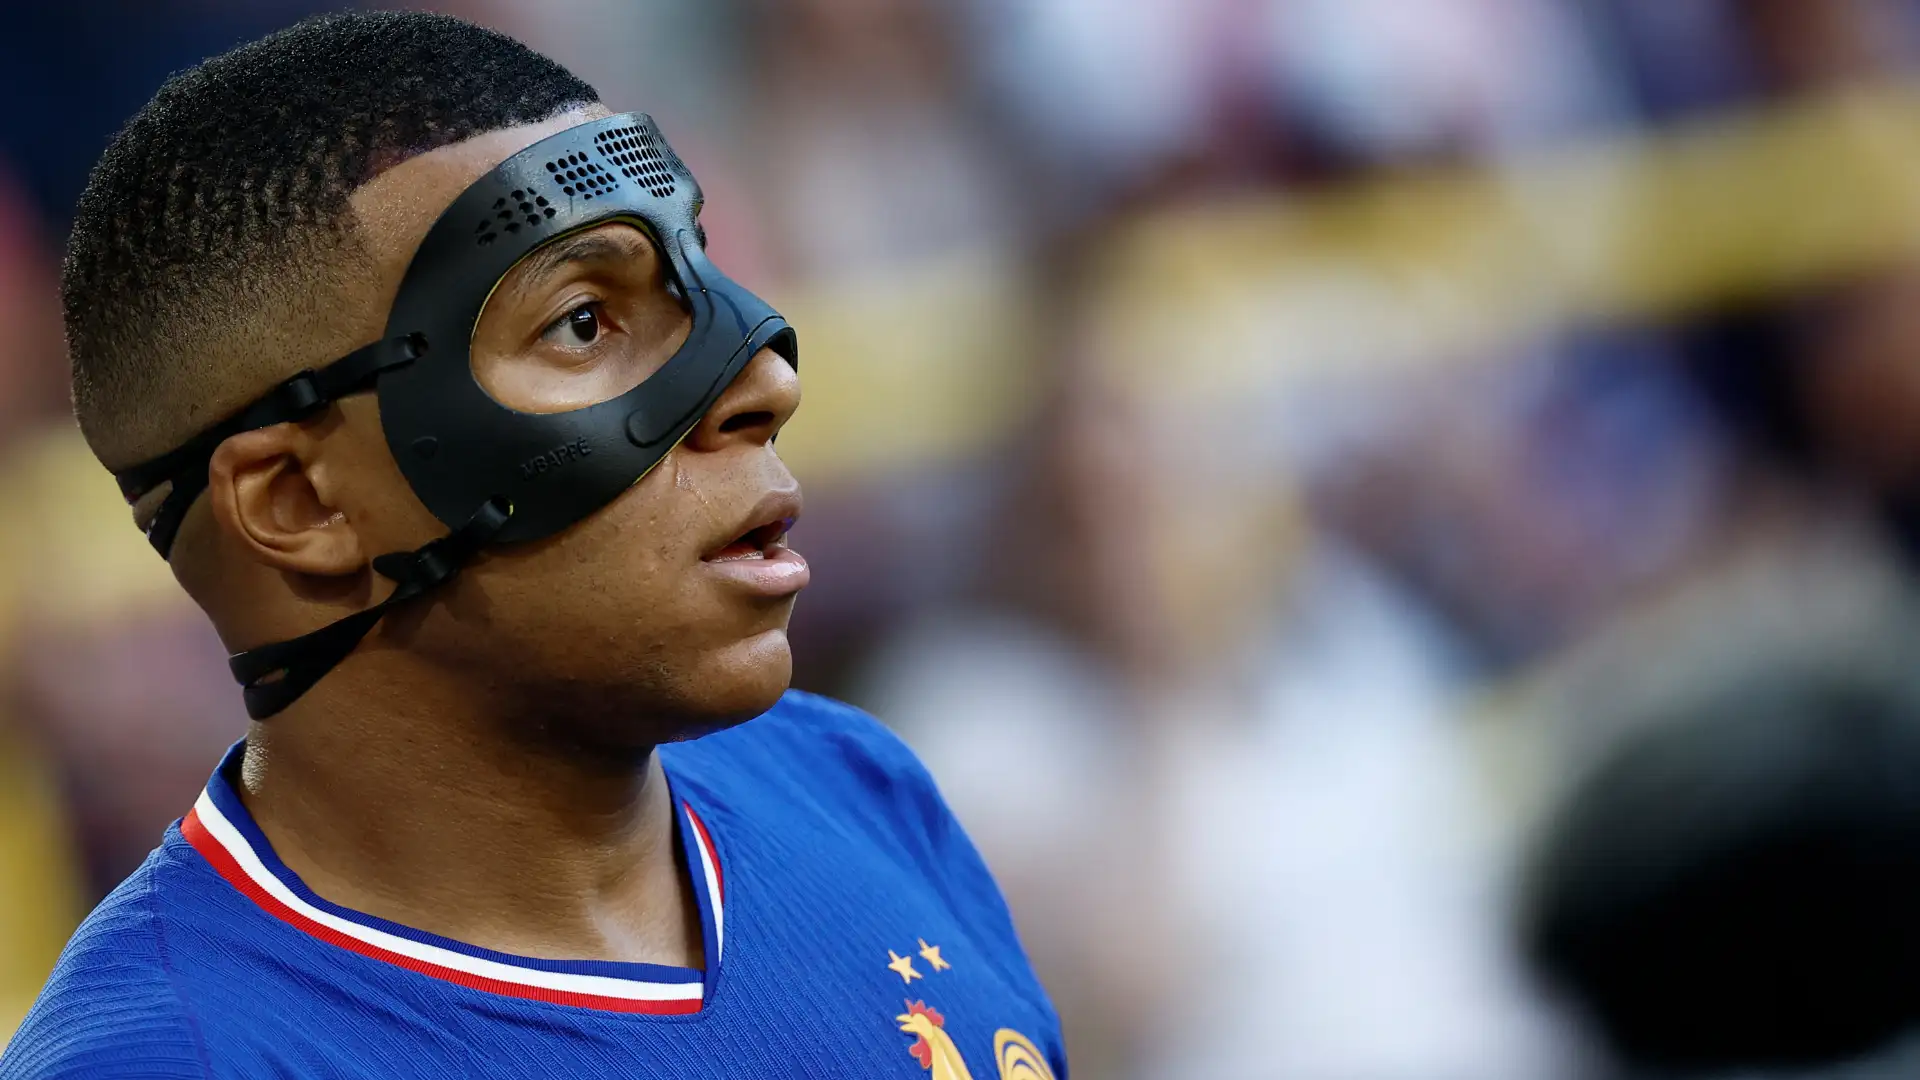 France forward says Mbappe ‘can’t see anything’ with his mask on